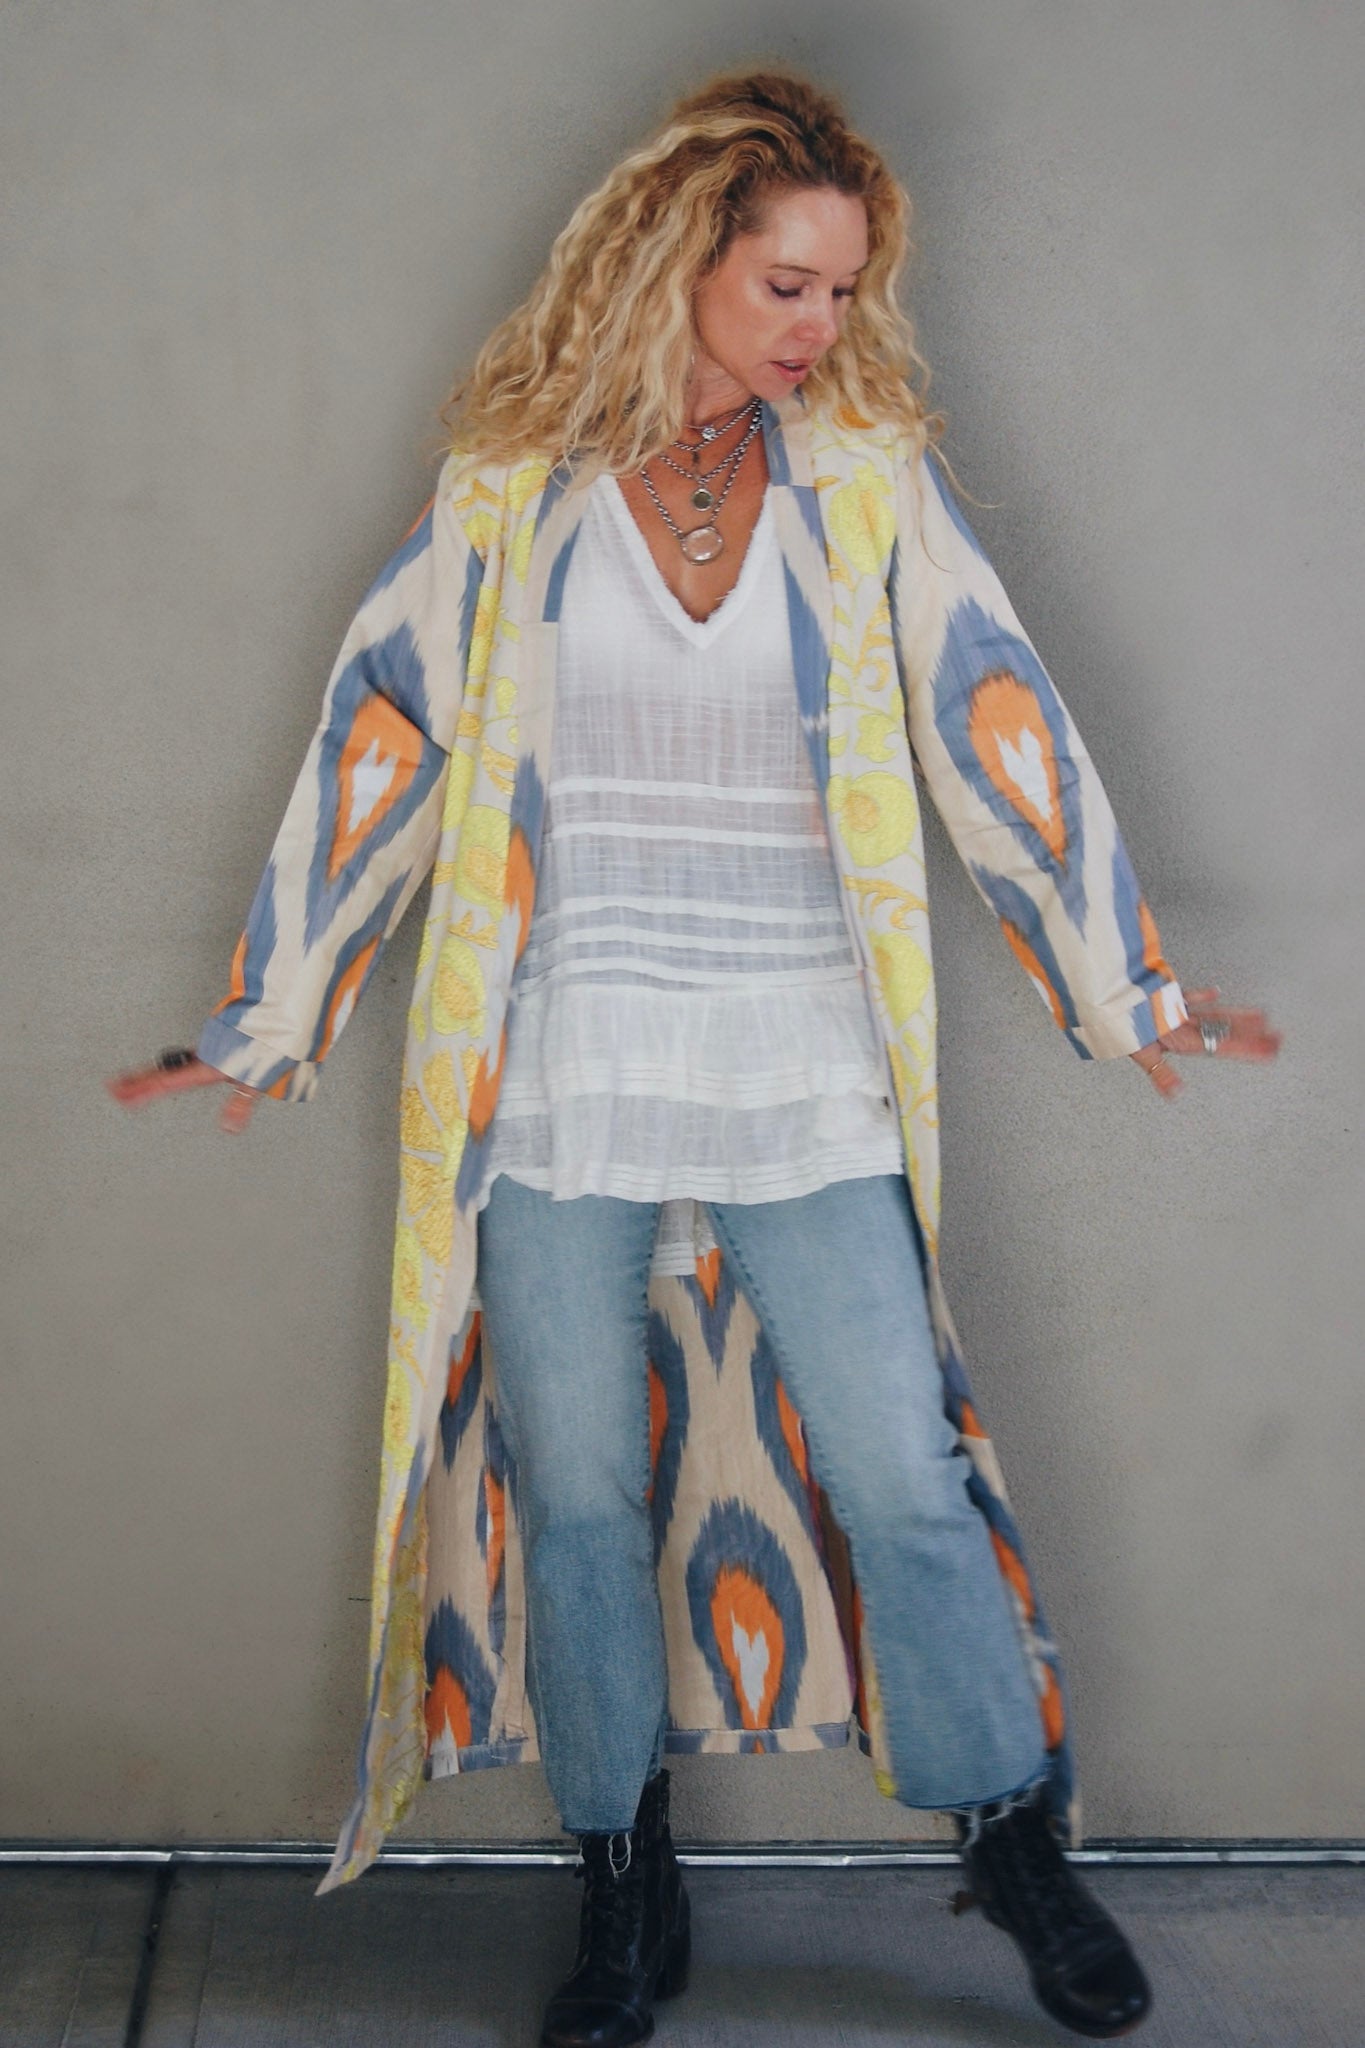 Load image into Gallery viewer, The Amelia Jacket in Peacock - SpiritedBoutiques Boho Hippie Boutique Style Jacket, Spirited
